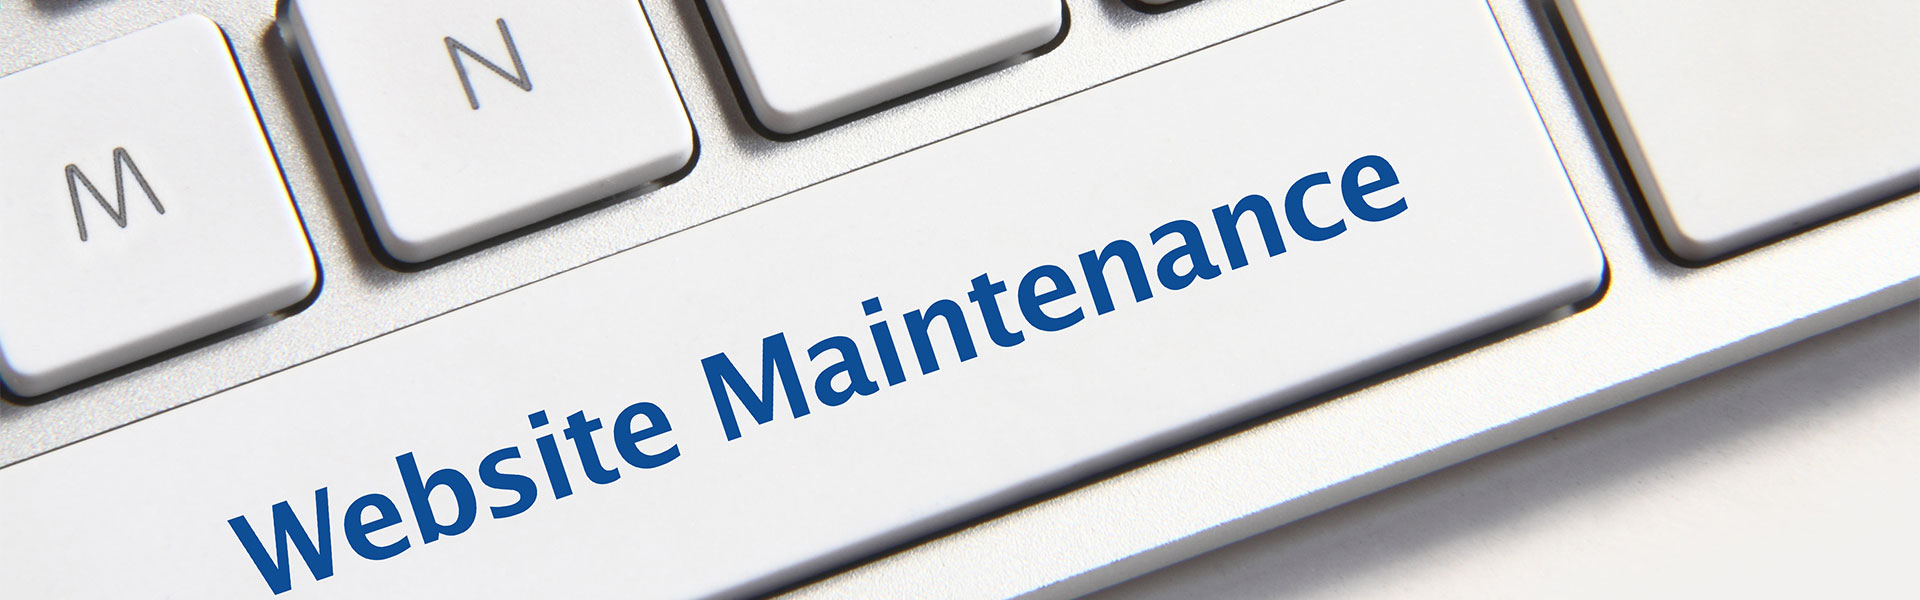 Affordable Web Design Ltd offers website maintenance when you need it.